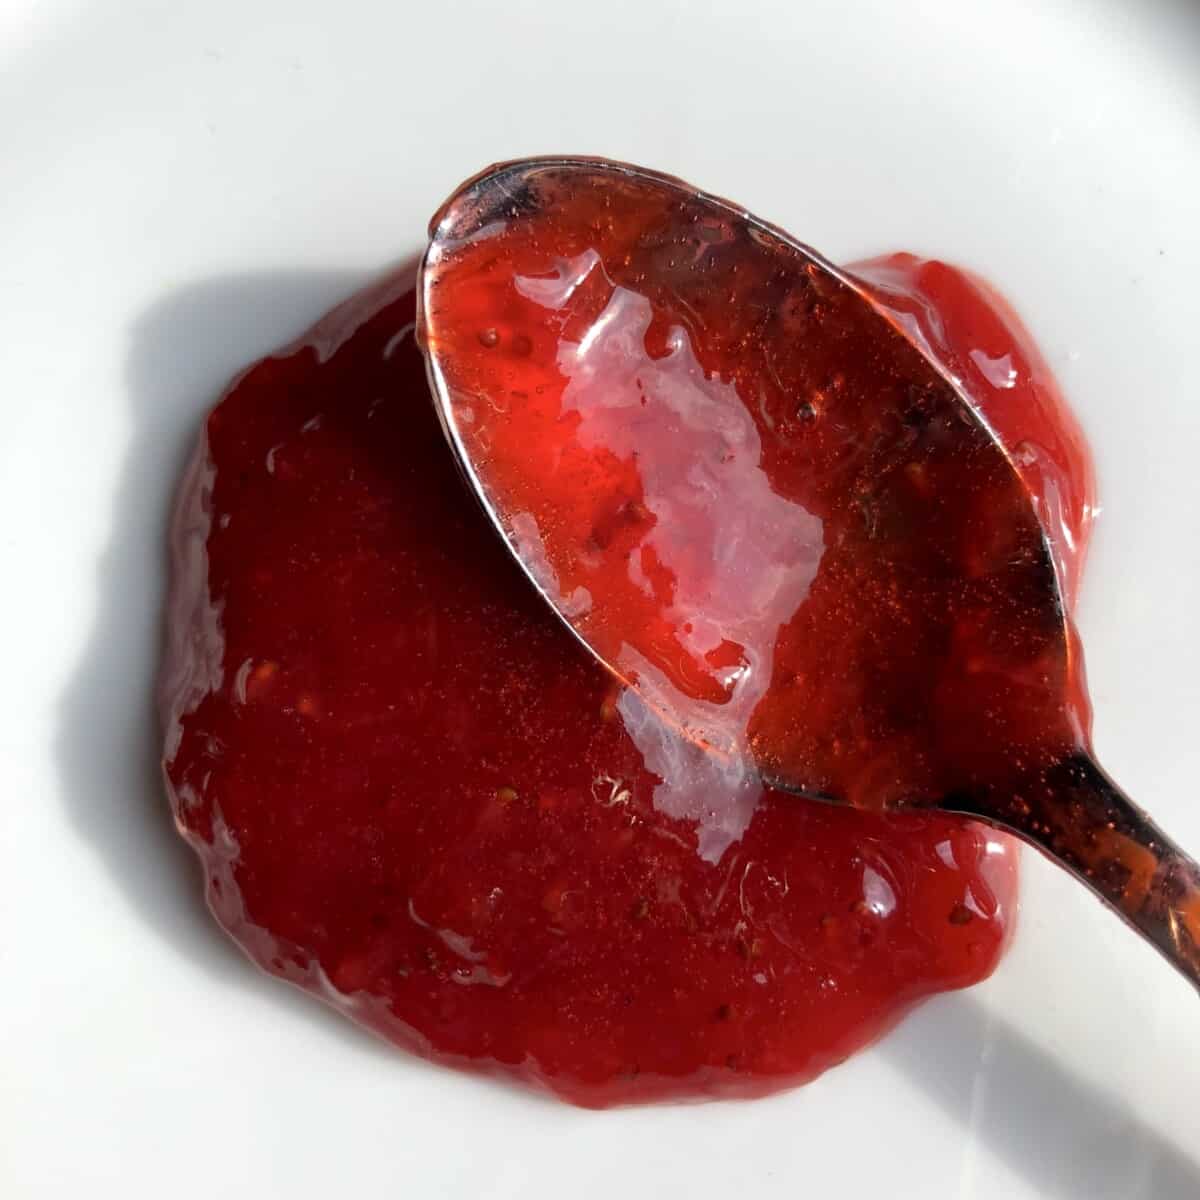 a spoon full of strawberry jam on a plate